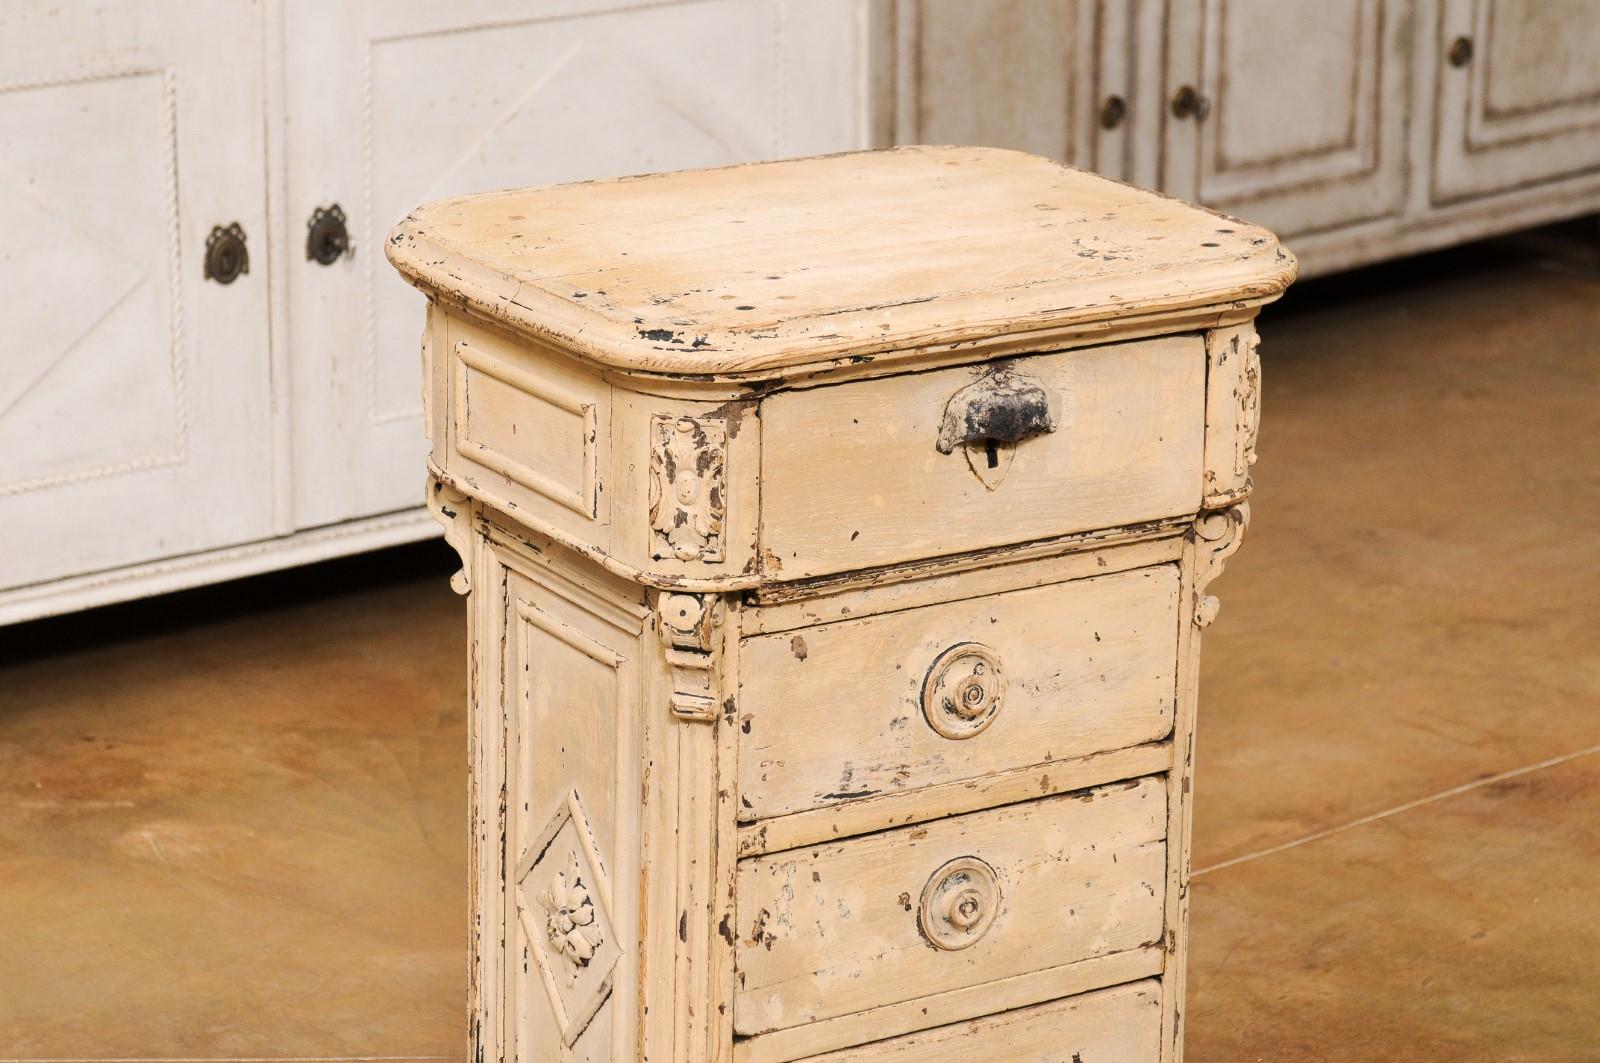 Carved French 19th Century Painted Fir Seeds Counter with Drawers and Distressed Patina